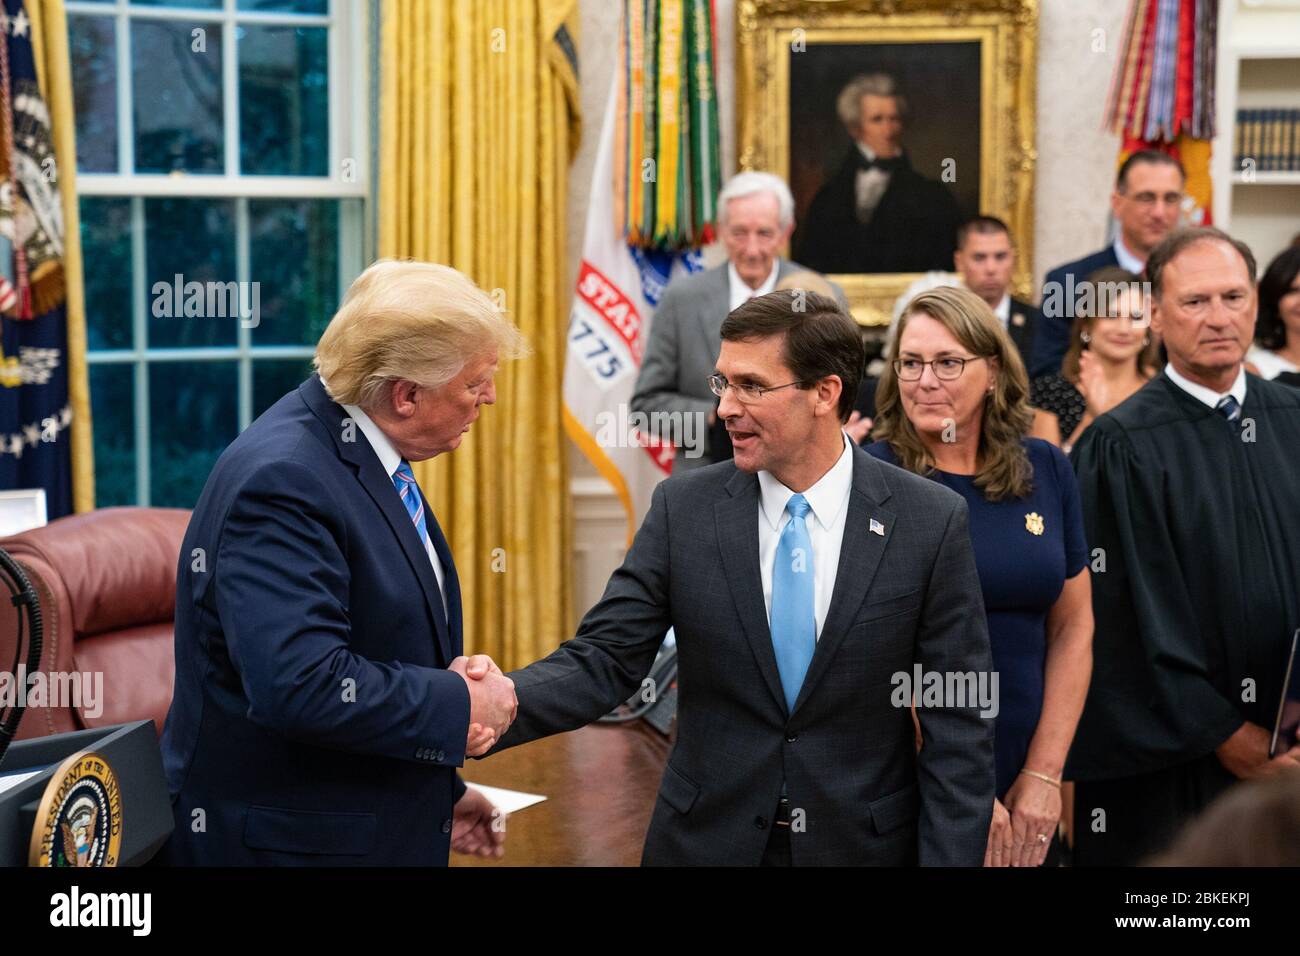 President Donald J. Trump congratulates newly sworn-in Secretary of Defense Mark Esper on Tuesday, July 23, 2019, in the Oval Office of the White House. Swearing-in Ceremony for Secretary of Defense Mark Esper Stock Photo